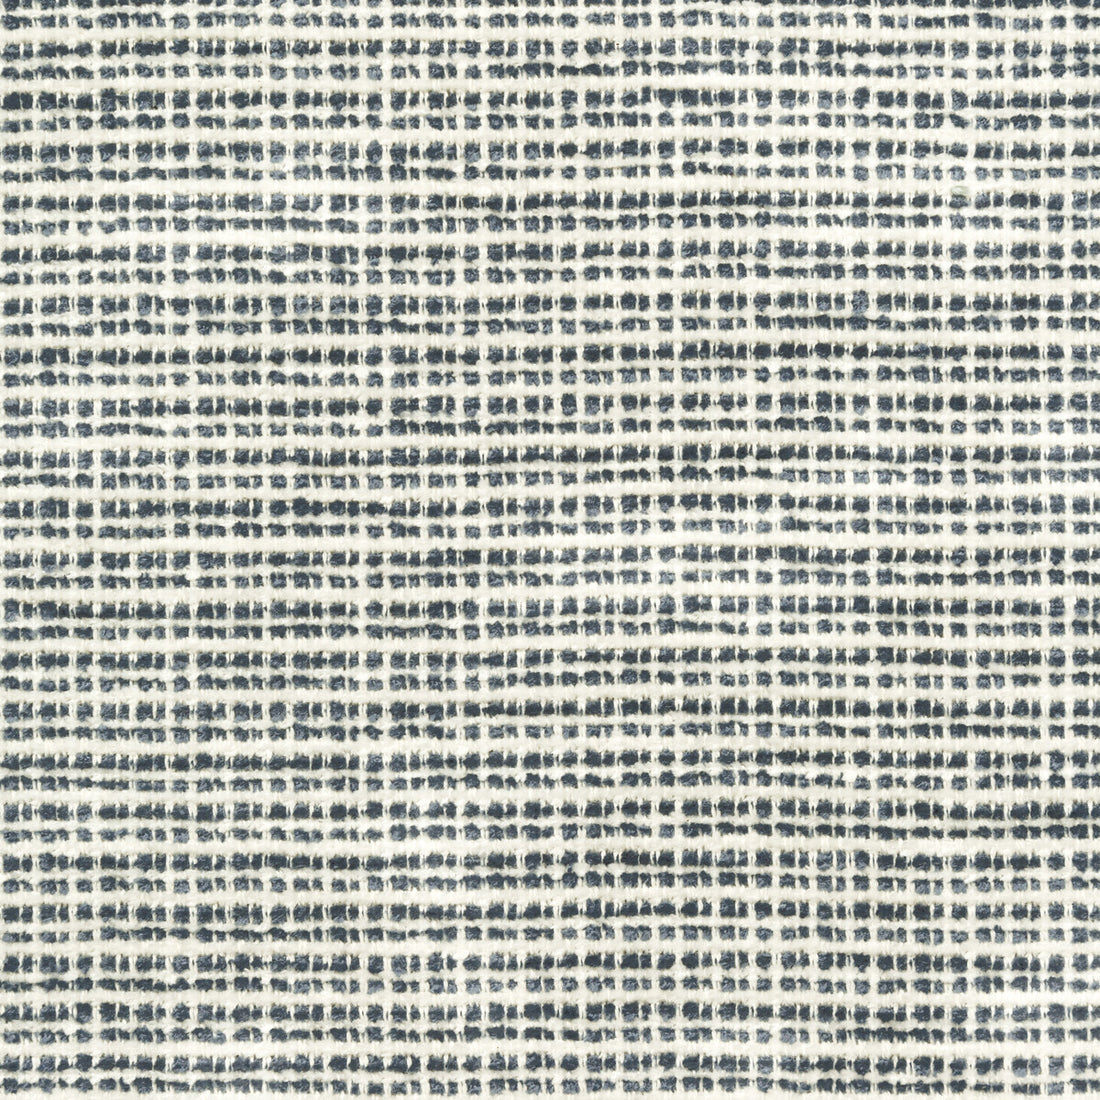 Freney Texture fabric in denim color - pattern 8019149.15.0 - by Brunschwig &amp; Fils in the Chambery Textures II collection